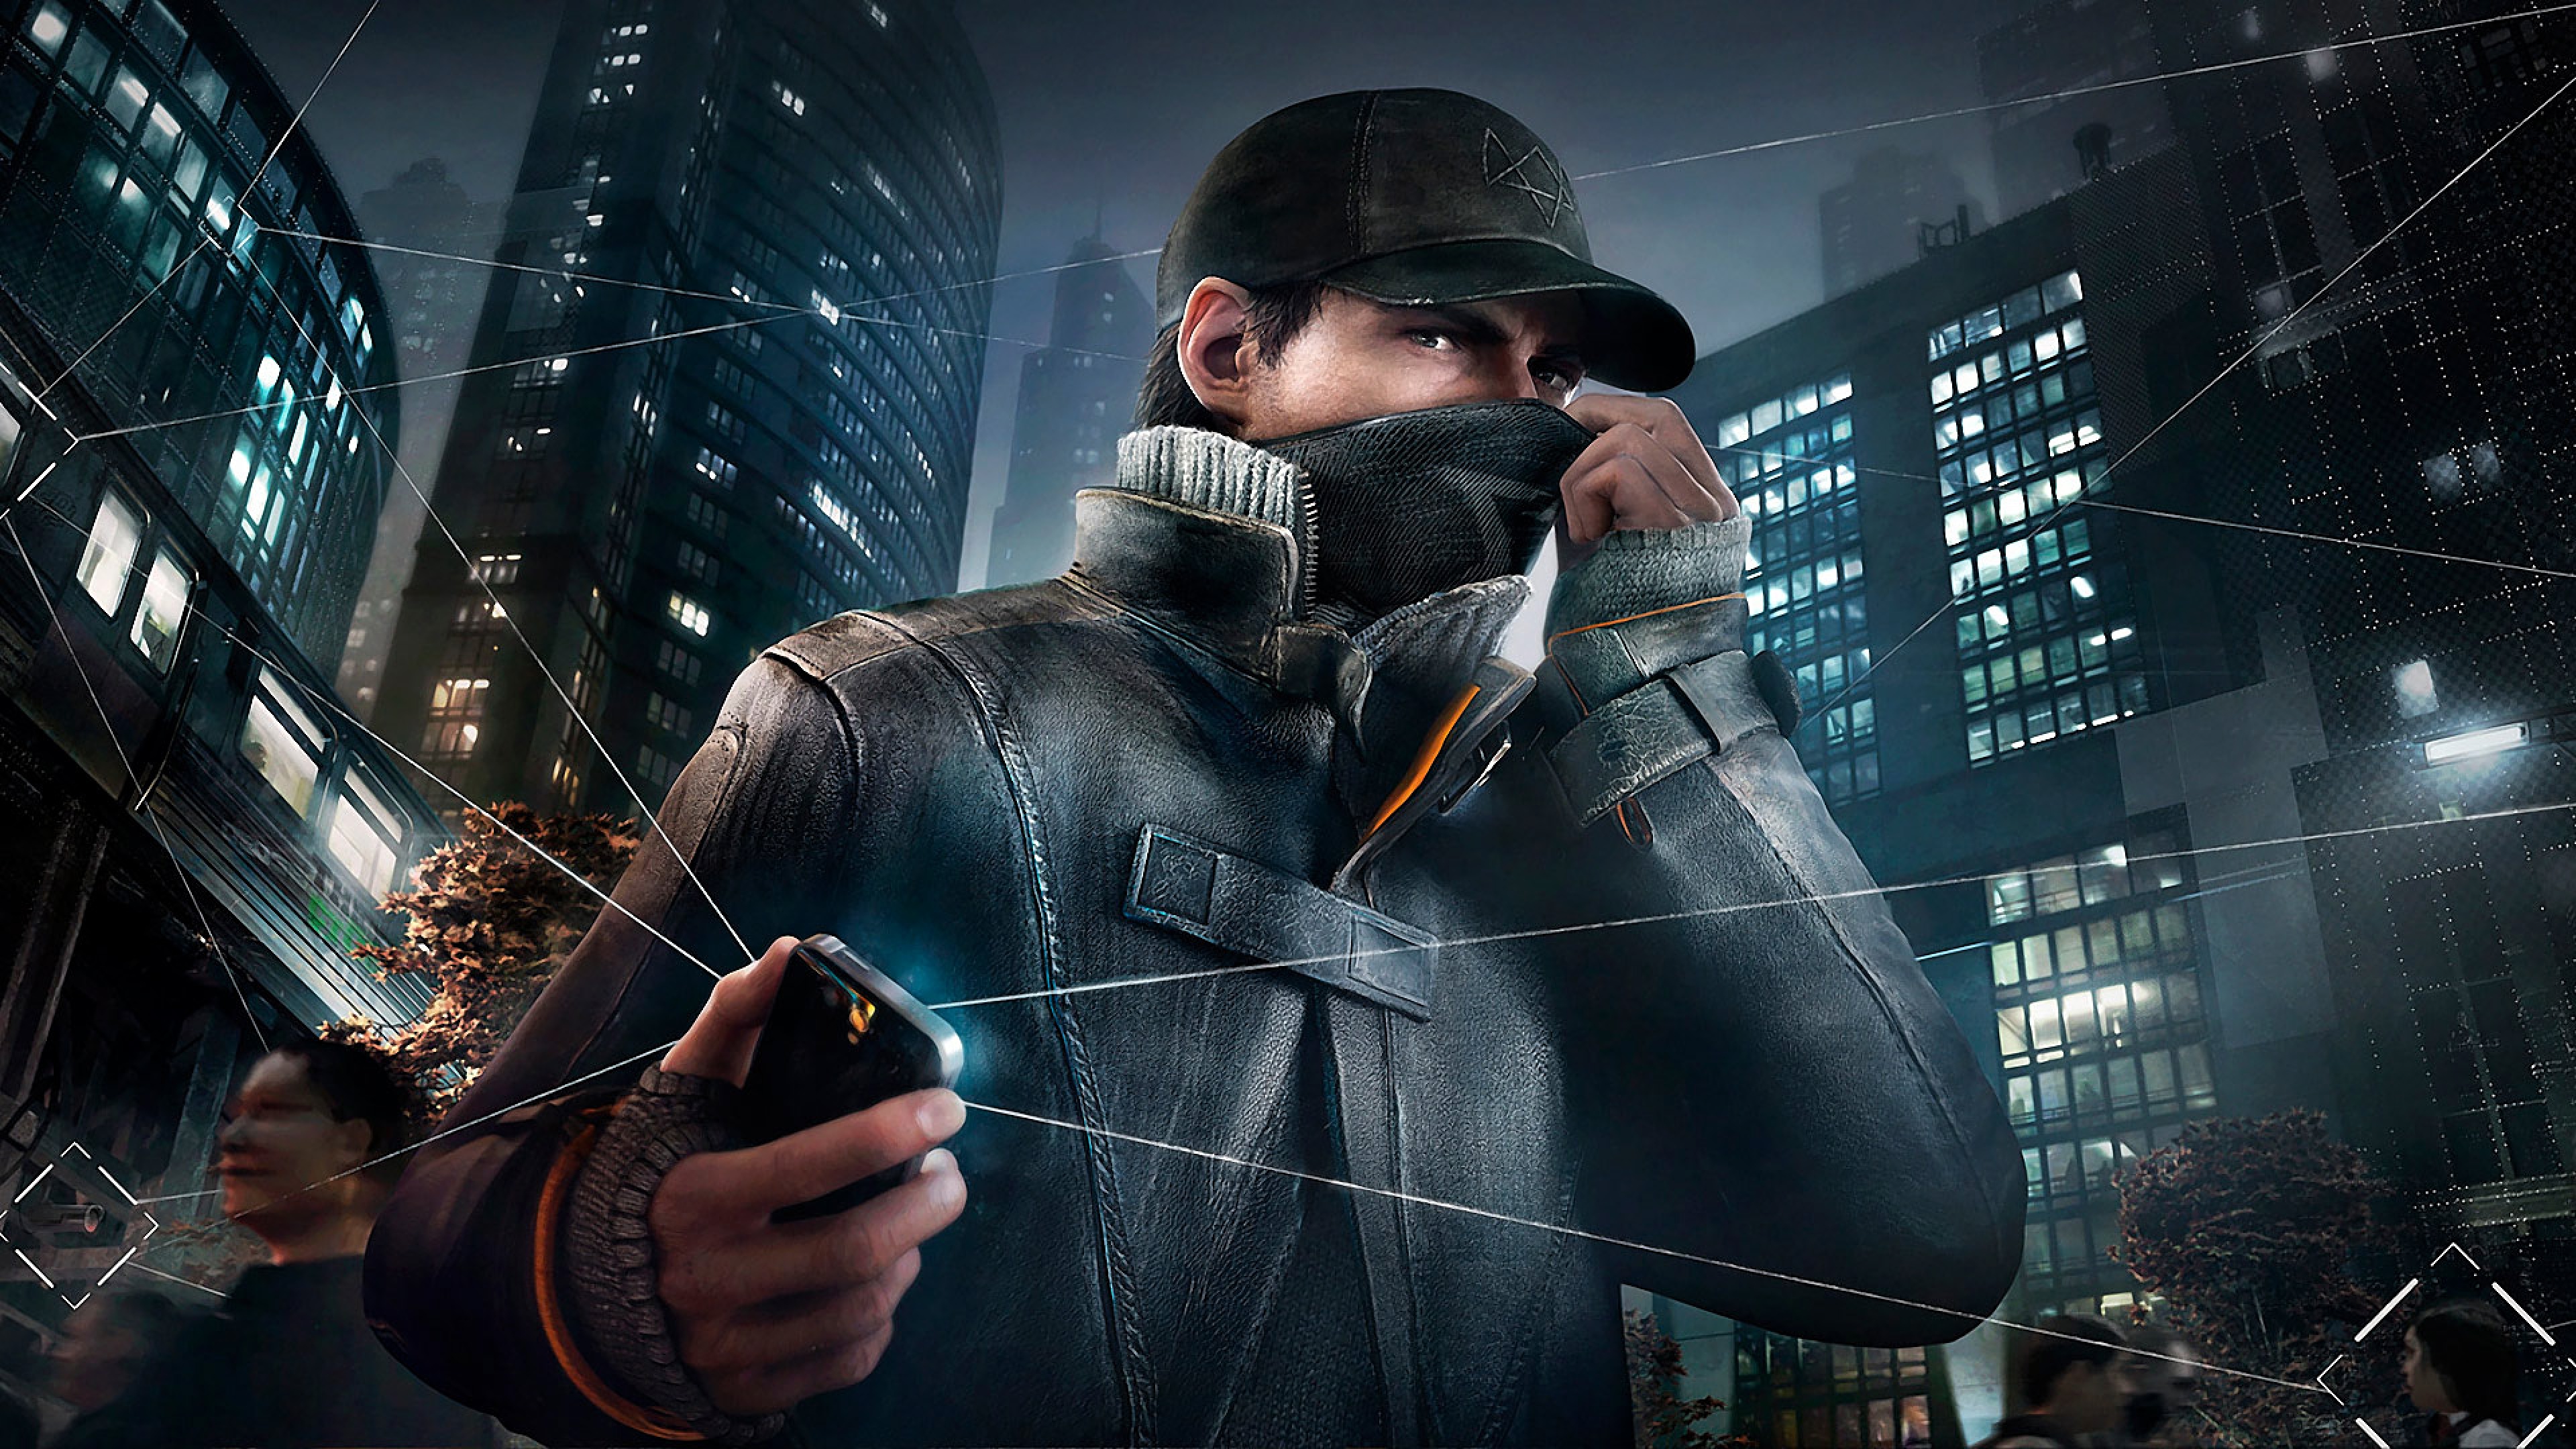 Free download Watch dogs Aiden pearce Game 2014 Wallpaper Background 4K  Ultra HD [3840x2160] for your Desktop, Mobile & Tablet | Explore 46+ 4K  Video Game Wallpapers | Video Game Desktop Wallpapers,